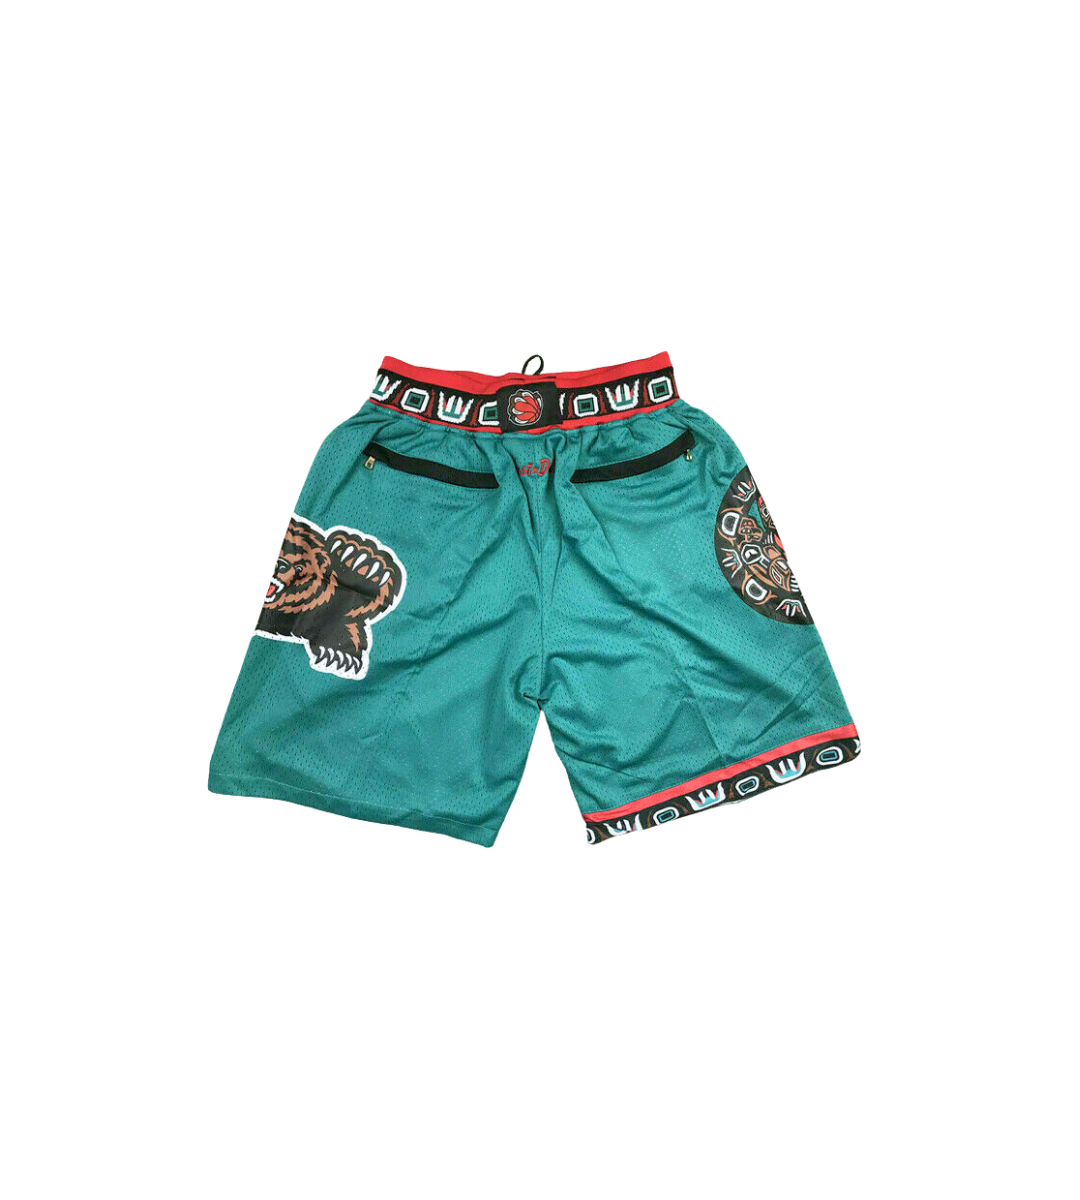 Vancouver Grizzles Shorts Teal - Basketball Shorts Store